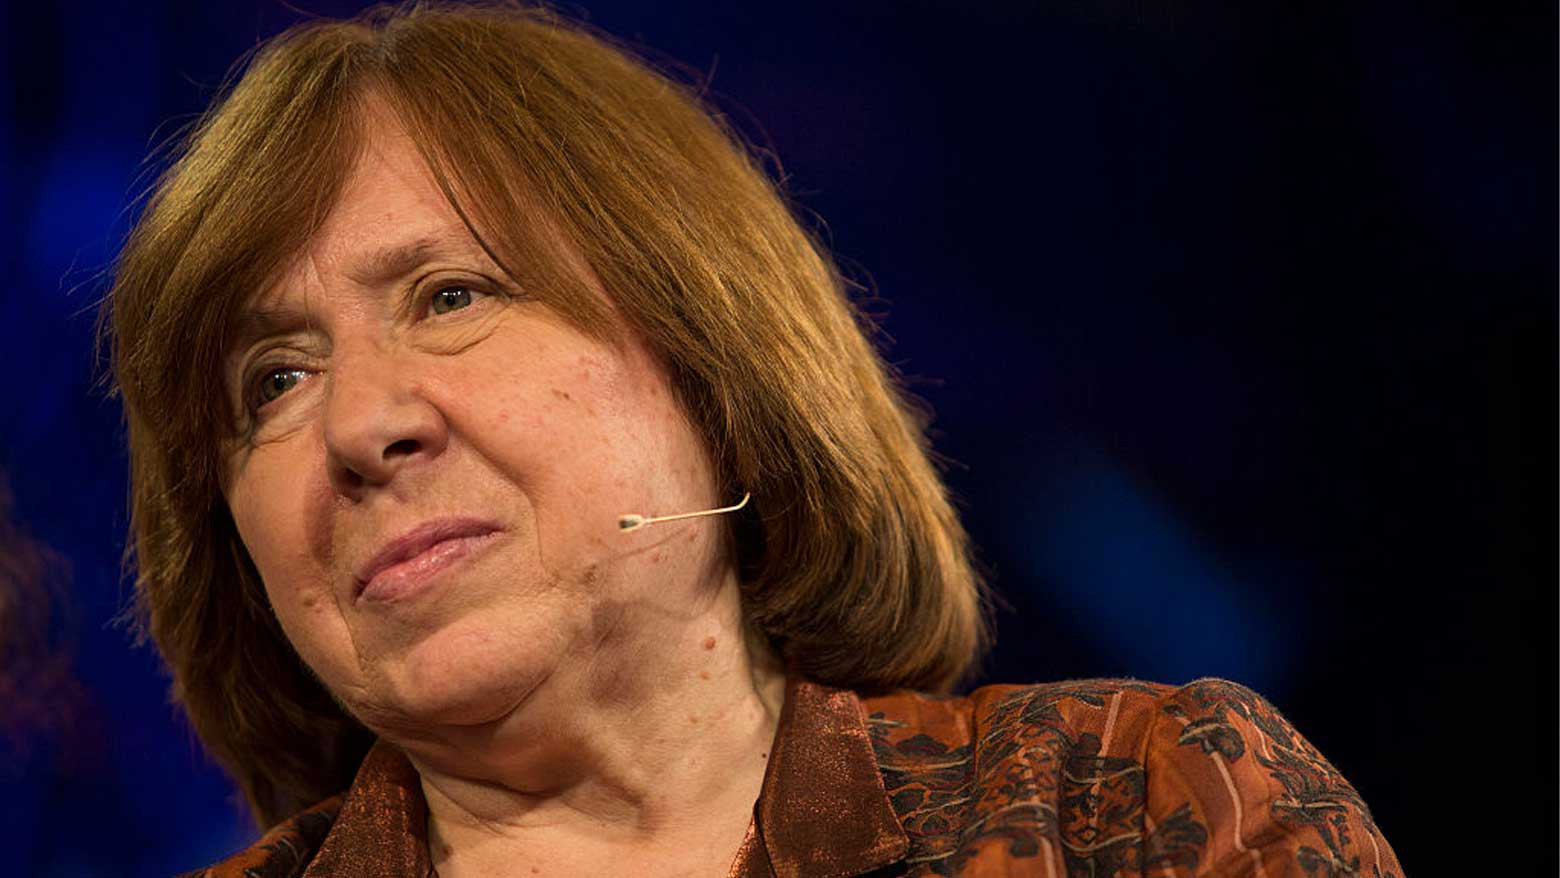 Nobel laureate Svetlana Alexievich: If we are not united, we will be annihilated